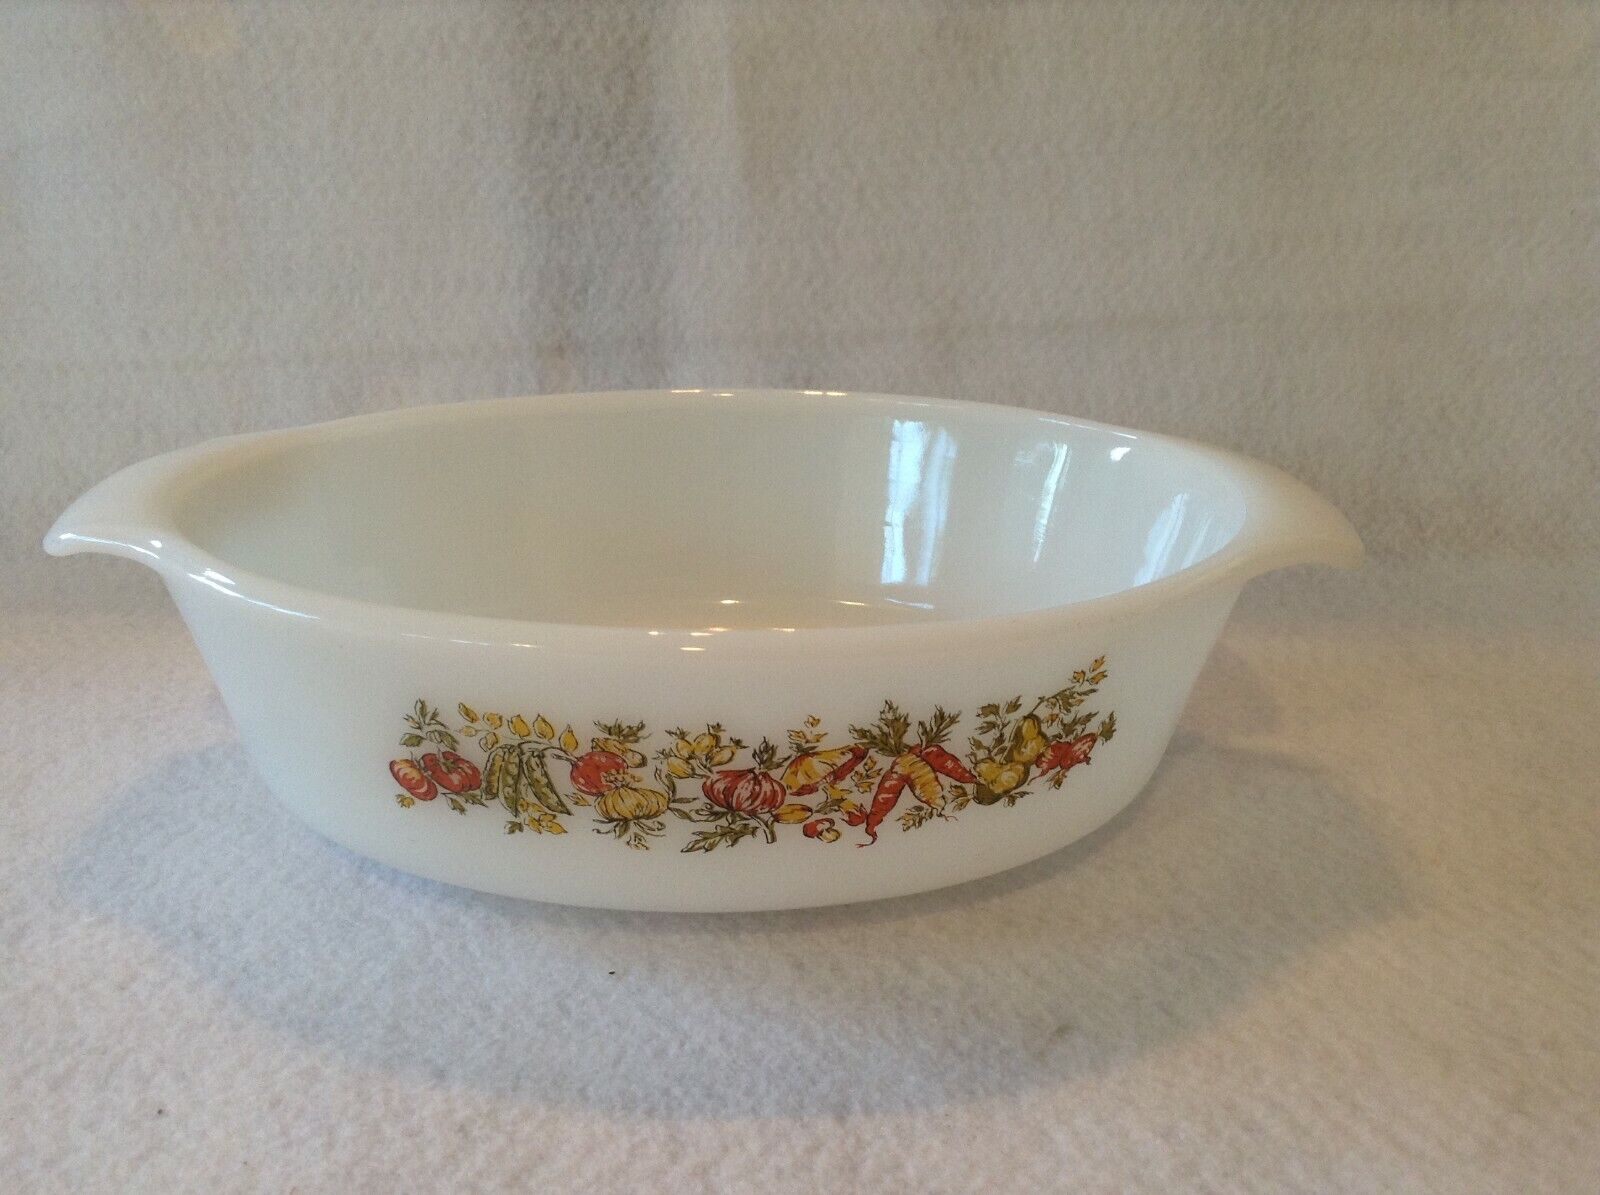 Fire King Anchor Hocking Oval Fall Harvest Casserole Dish Collectible Bakeware